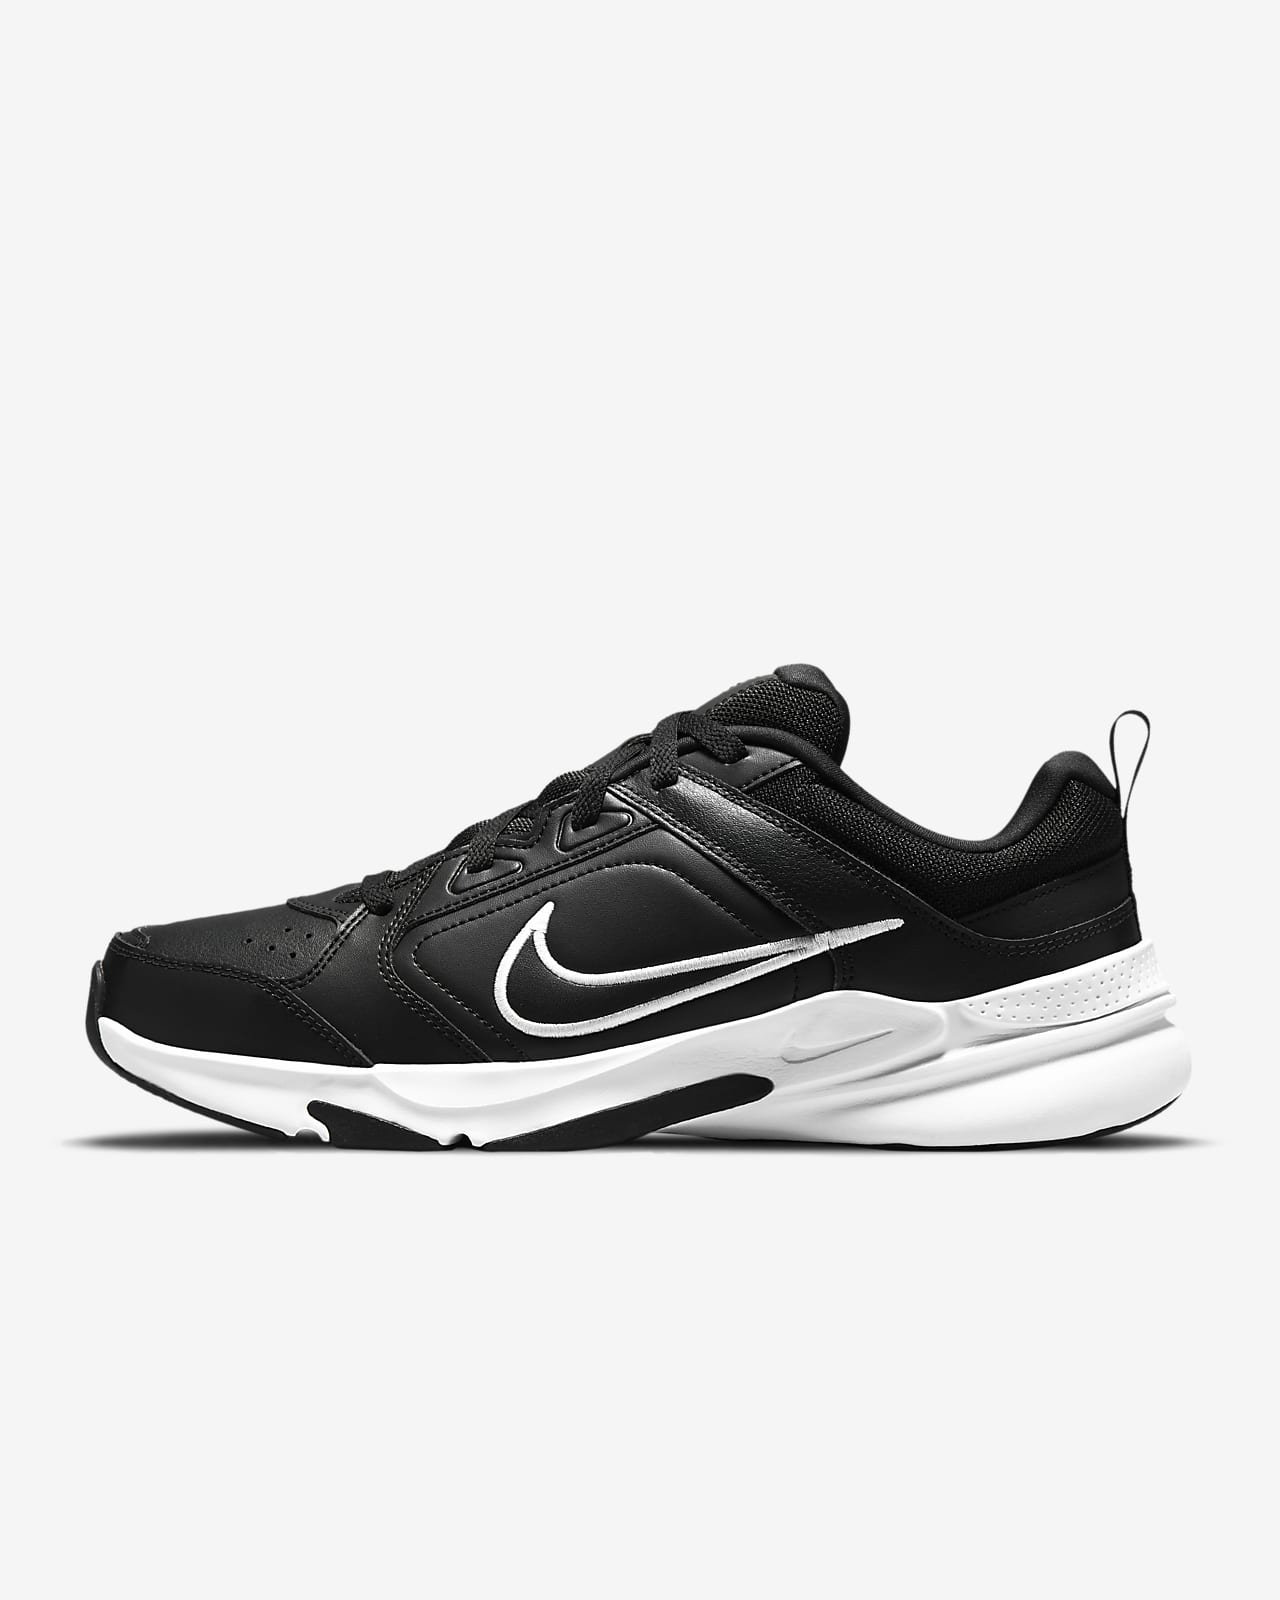 Nike Defy All Day Men's Training Shoes